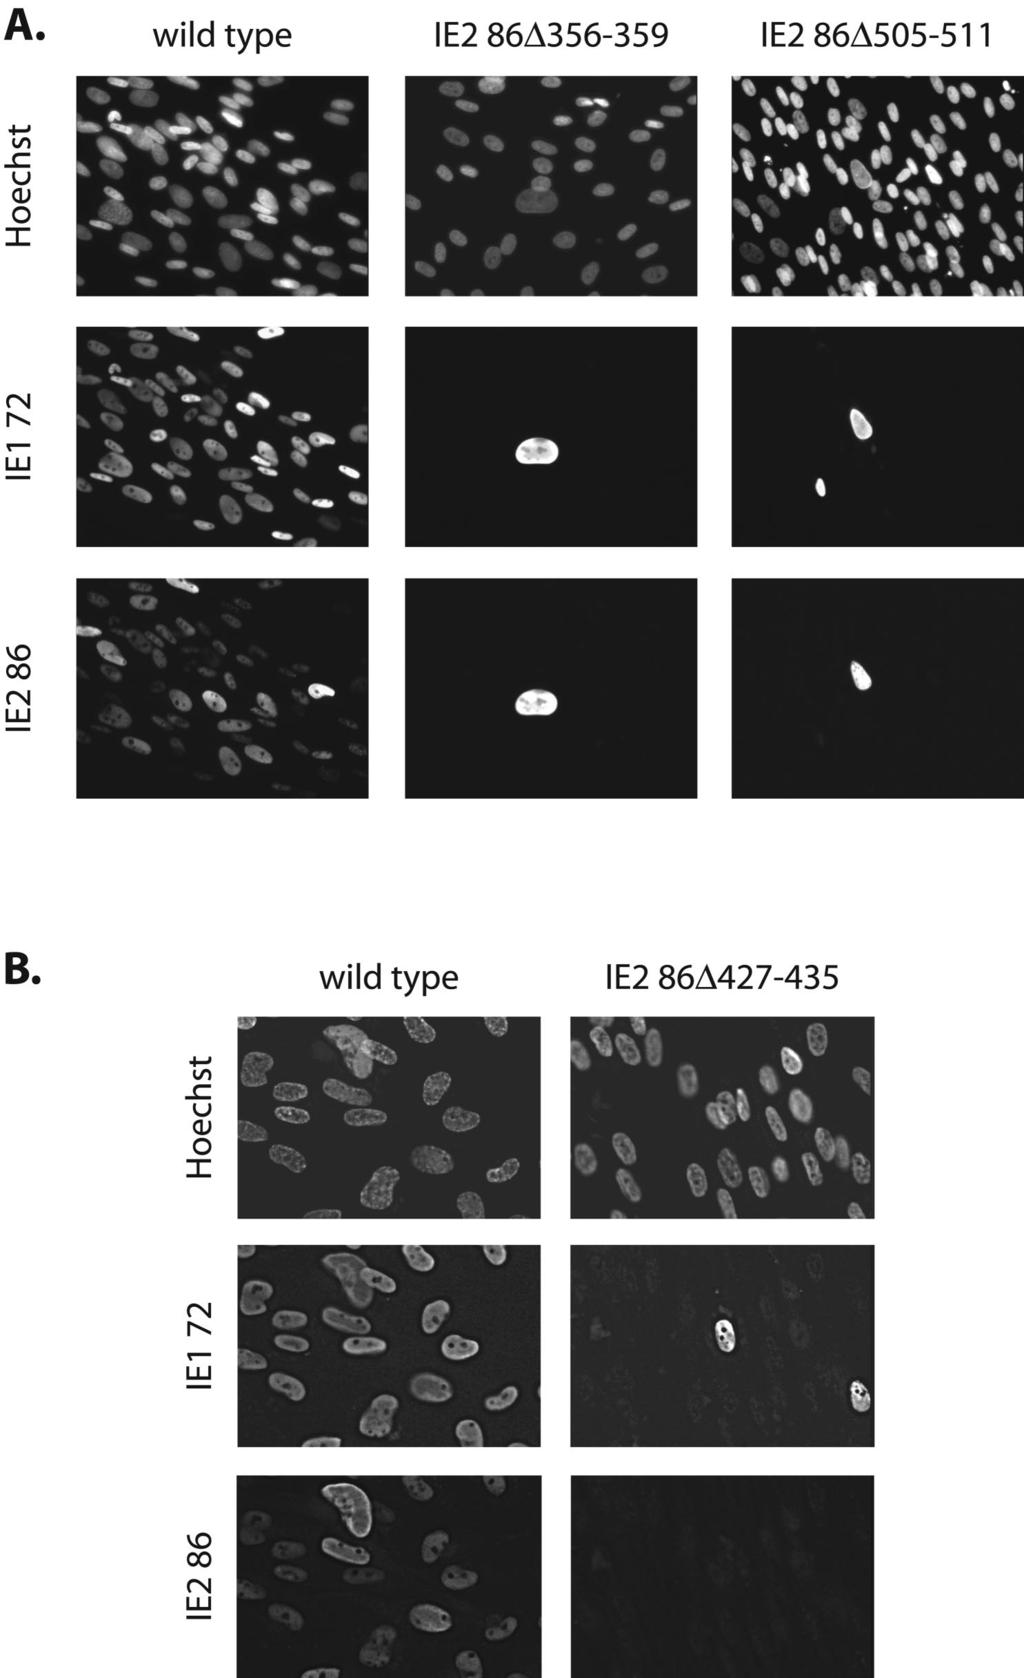 1824 WHITE ET AL. J. VIROL. FIG. 4. IE1 72 and IE2 86 expression in wild-type- and IE2 86 mutant BAC-electroporated cells at 9 days postelectroporation.